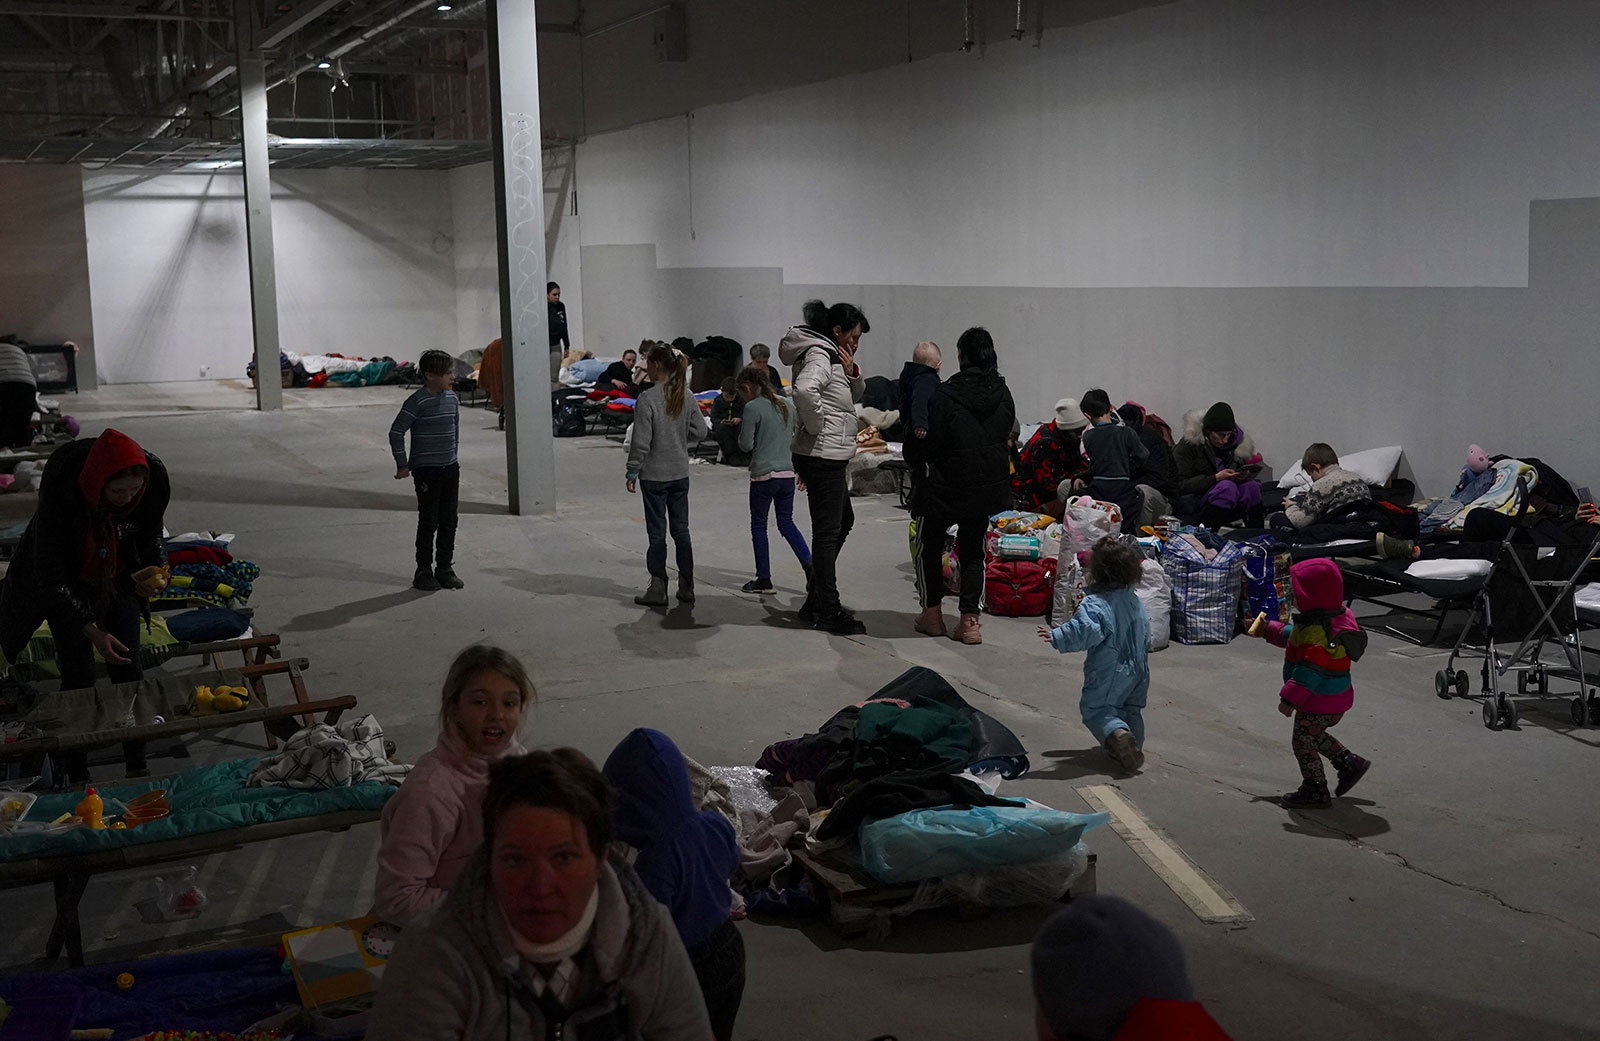 Ukrainian refugees wait in an empty shopping center to be transported from Przemysl, Poland, on March 4.